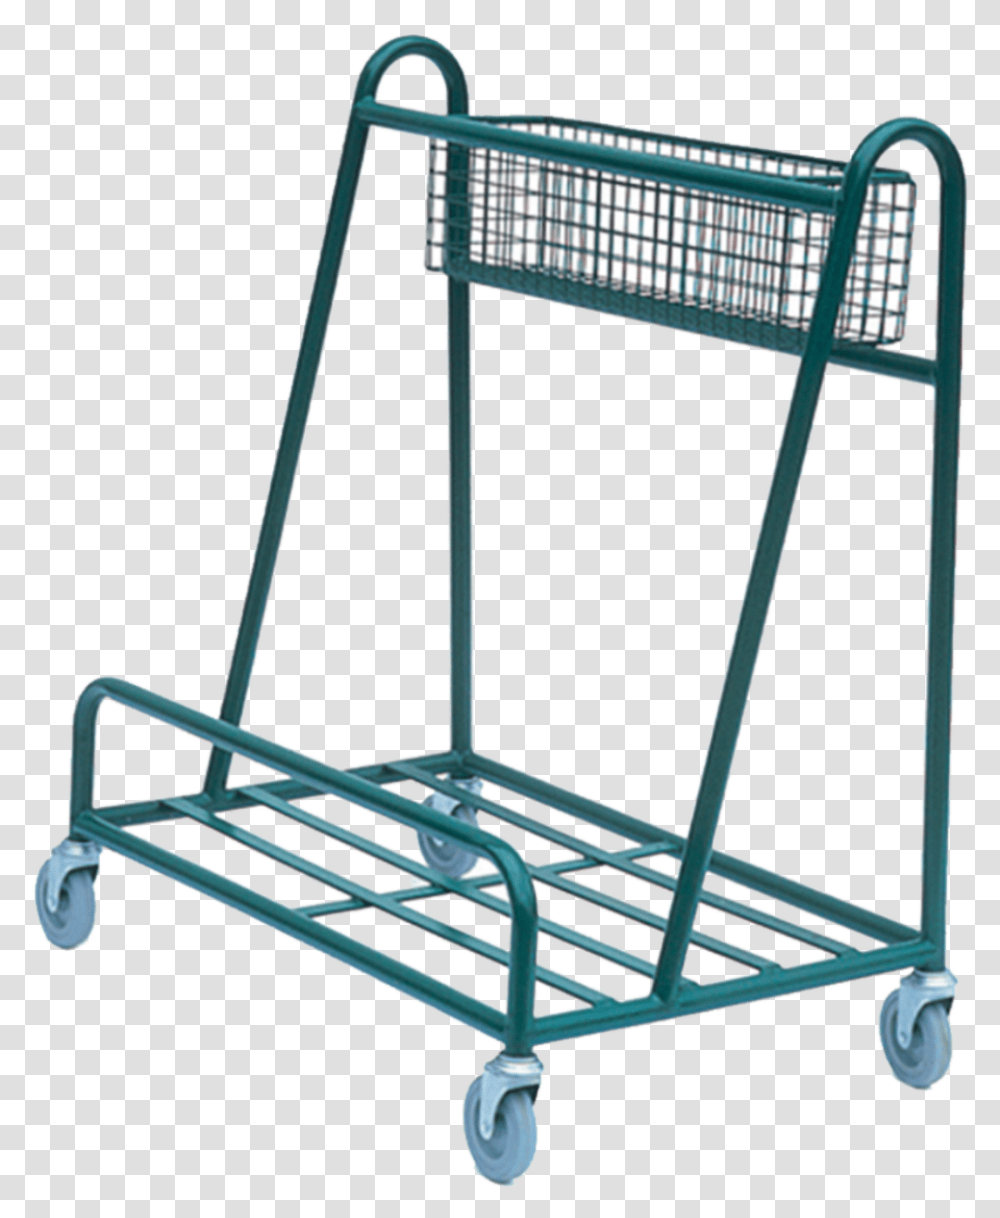 Shopping Cart, Stand, Hurdle, Sled, Barricade Transparent Png